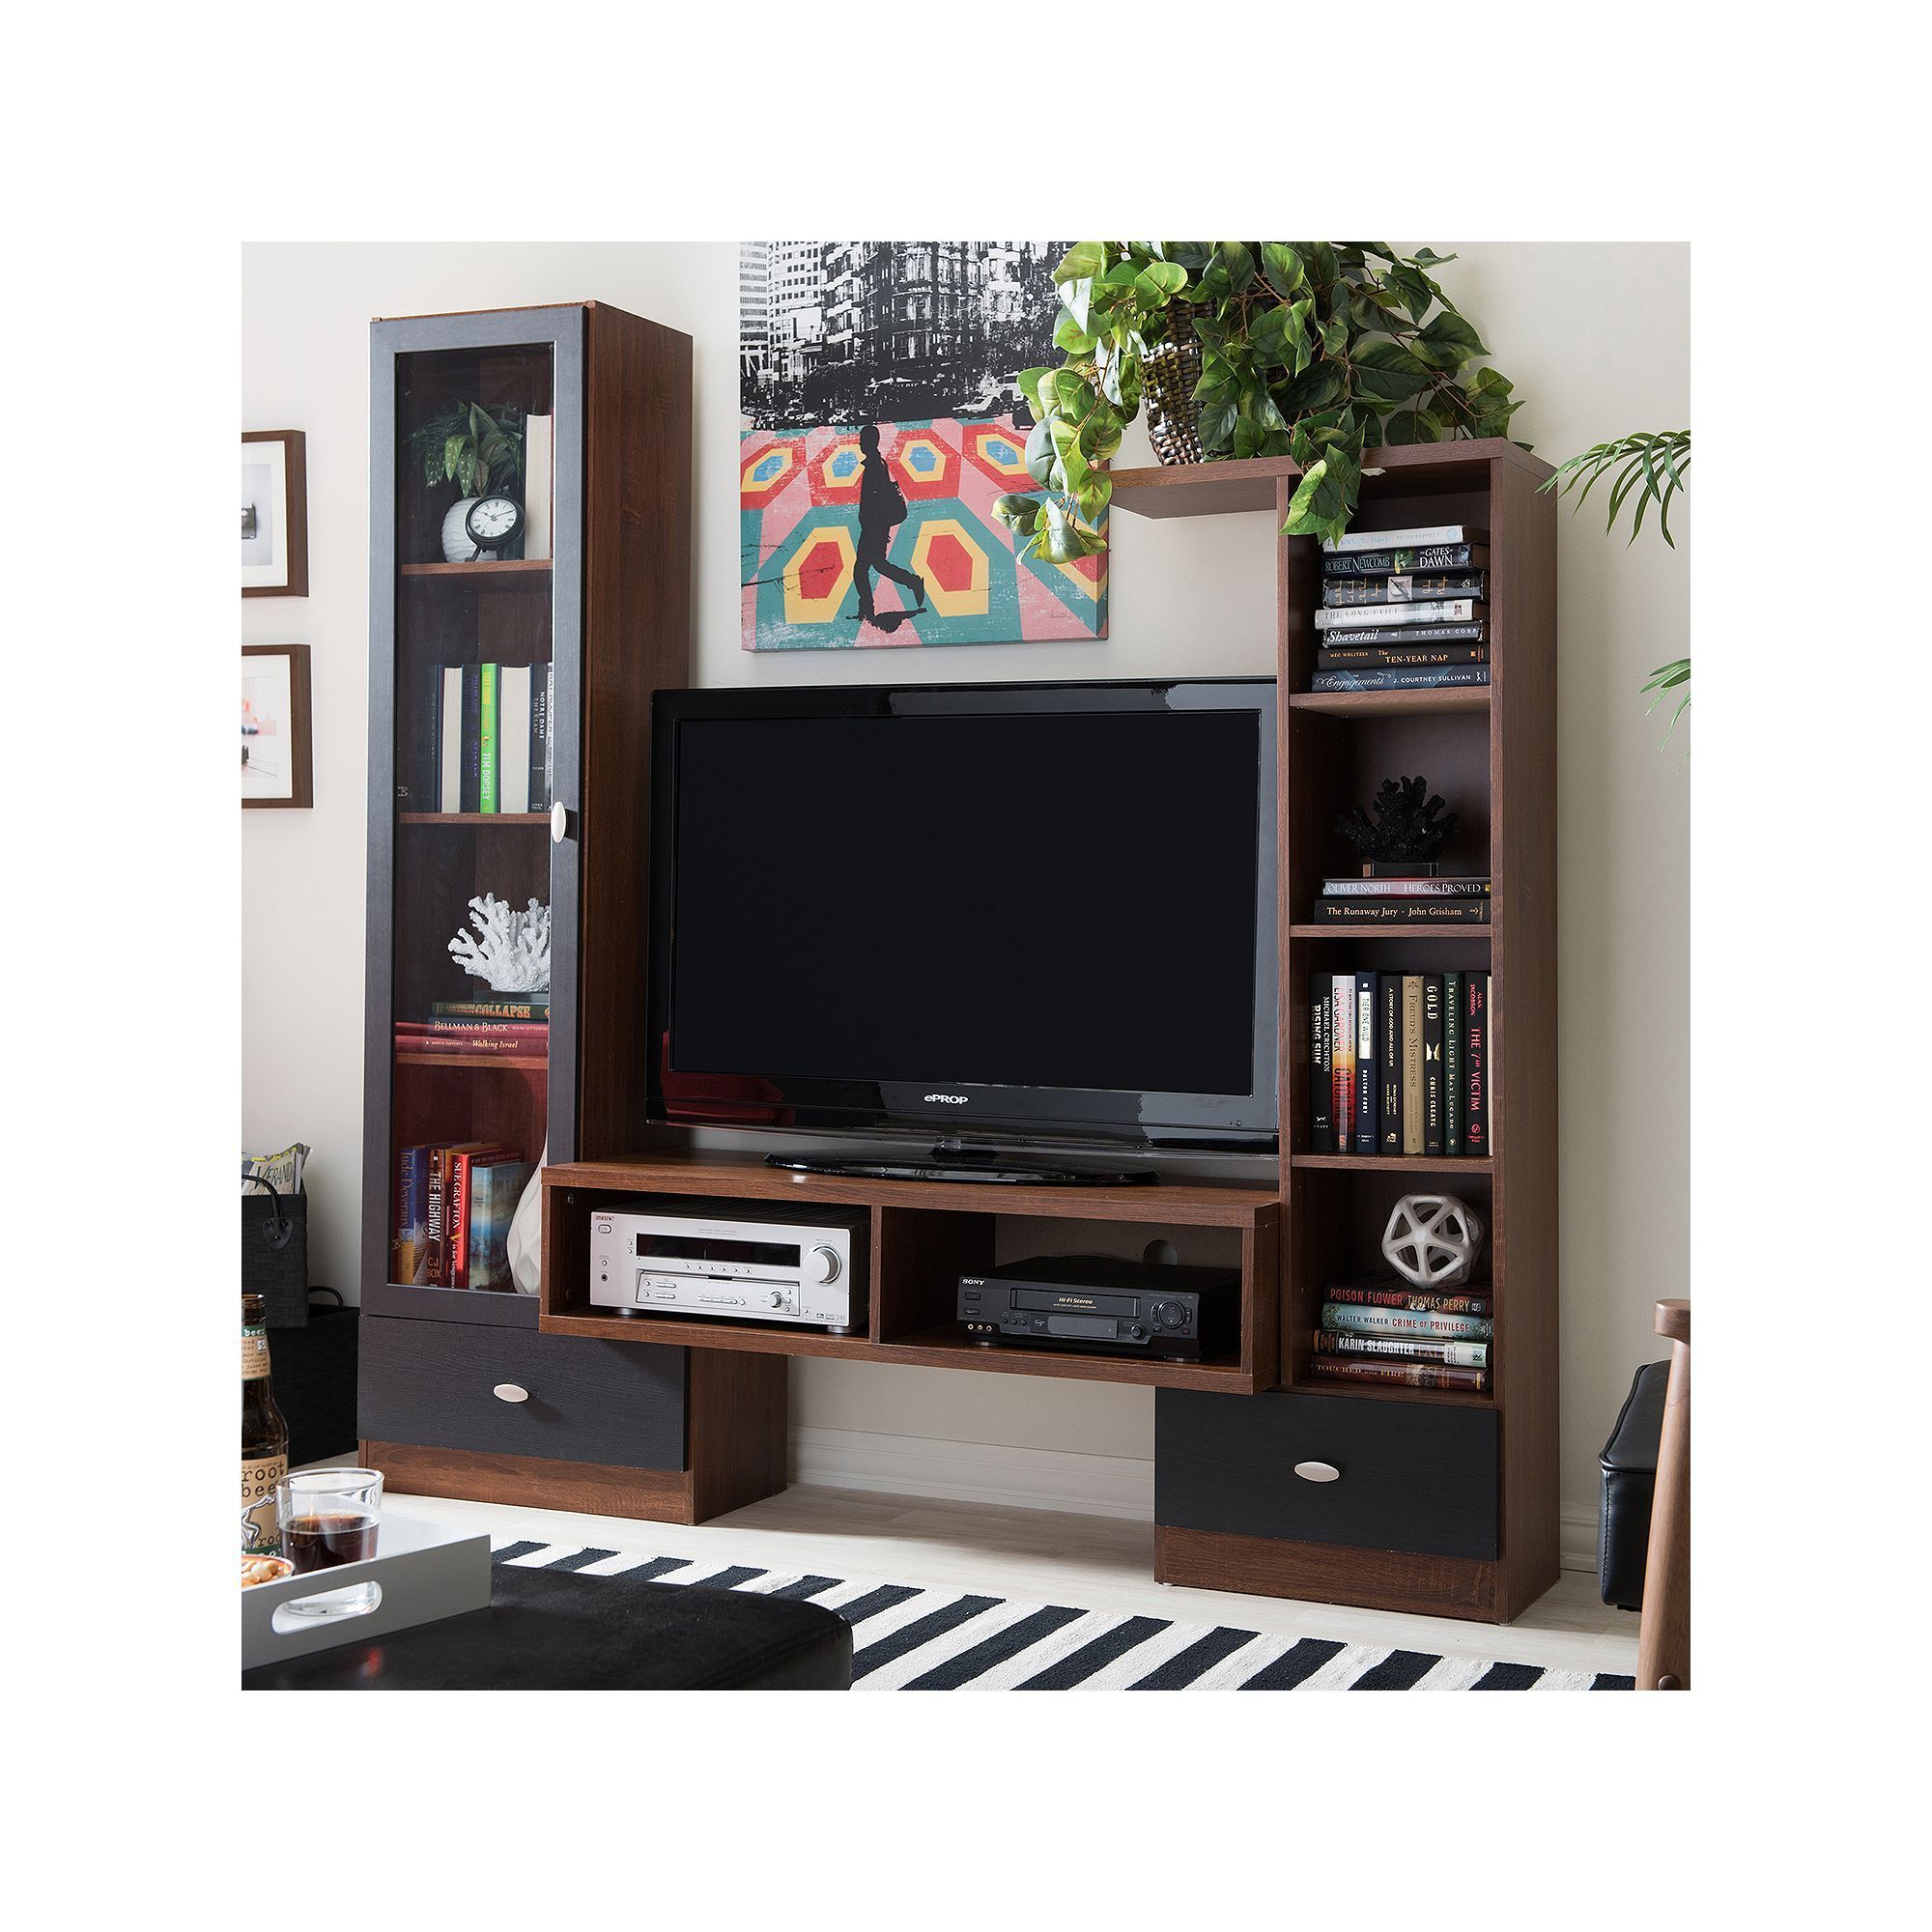 Baxton Studio Empire Tv Stand | Contemporary Tv Stands With Funky Tv Cabinets (View 6 of 15)